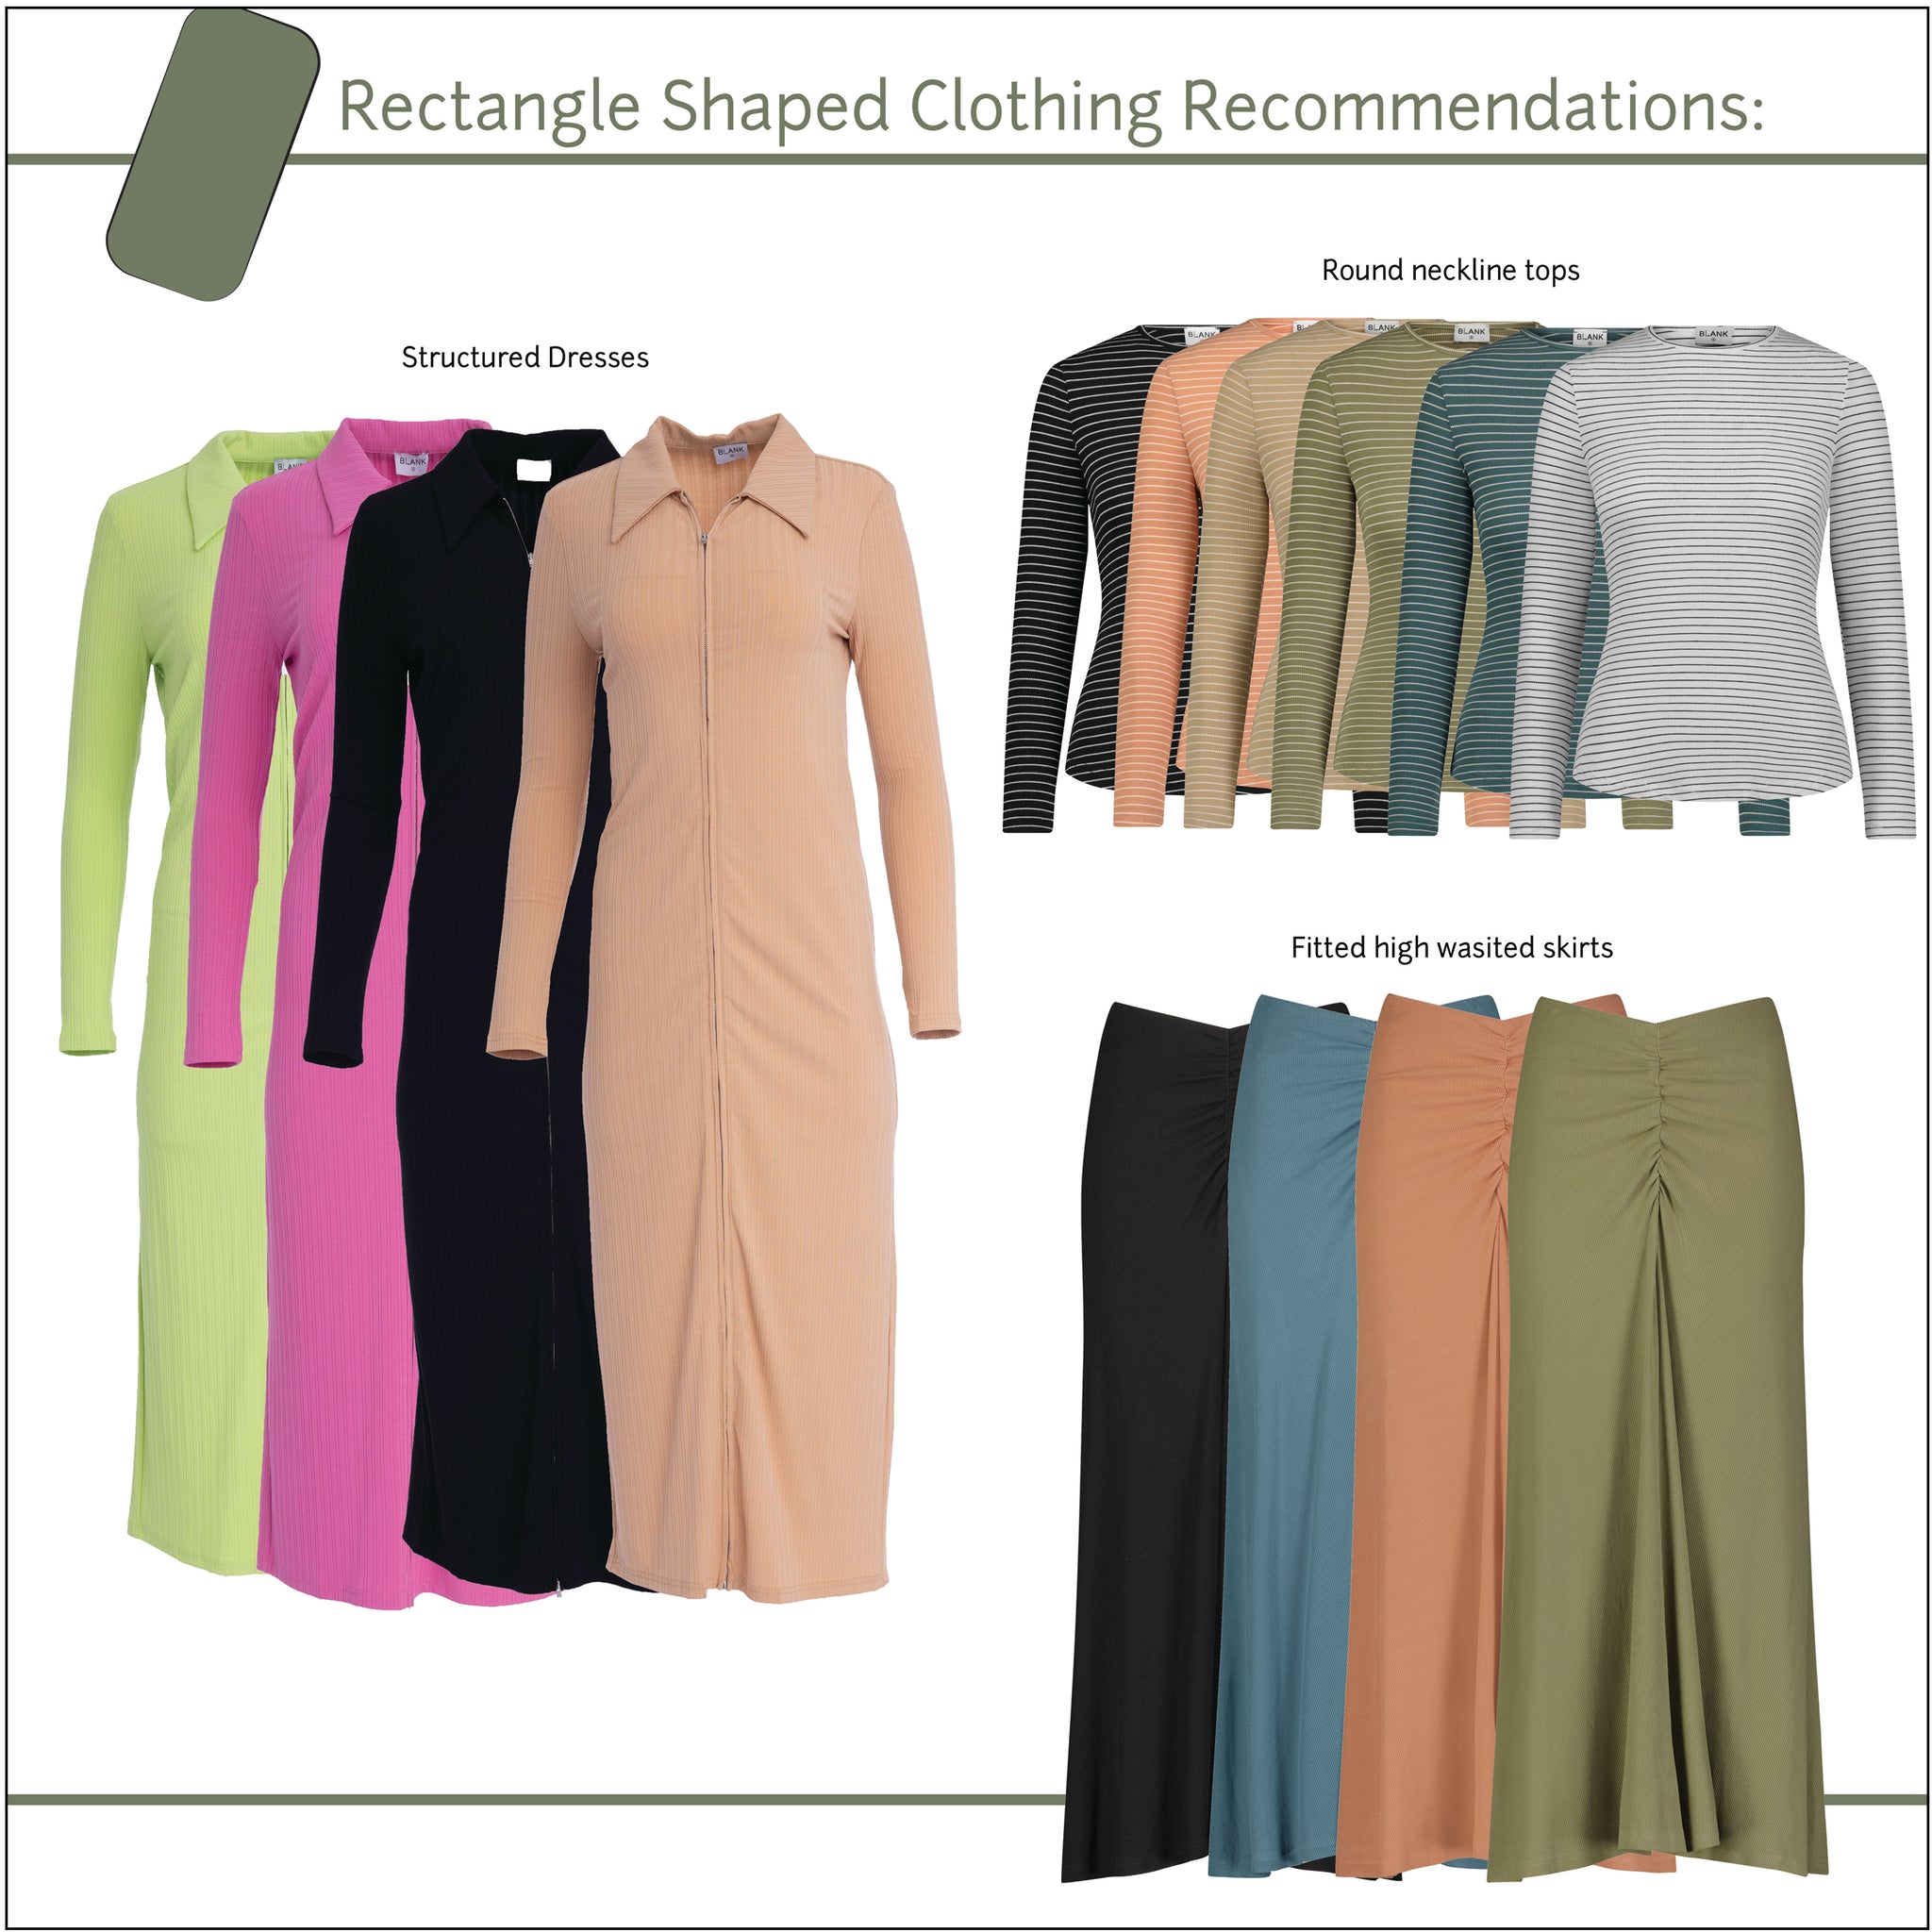 How to dress for a rectangle figure